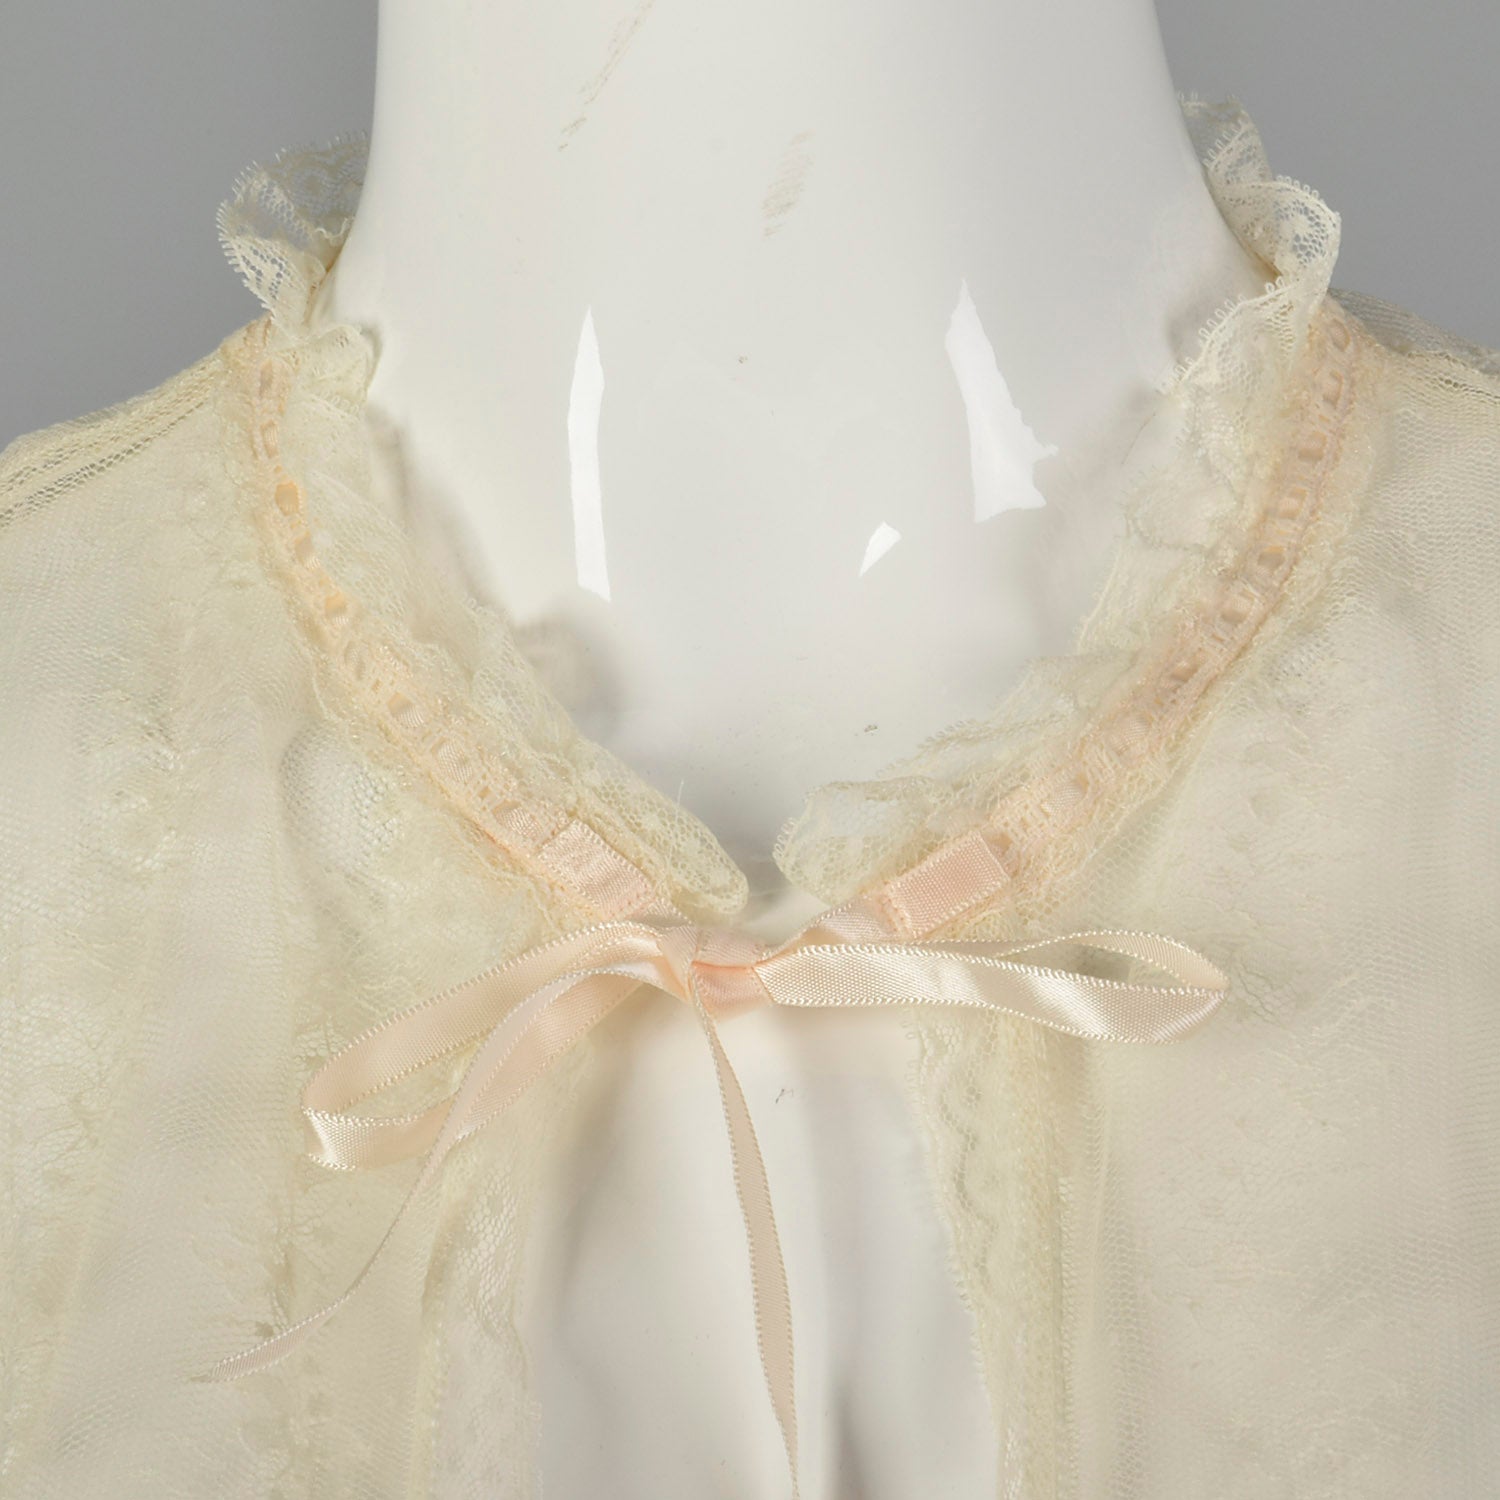 XS Miss Dior Christian Dior 1980s Lace Bed Jacket